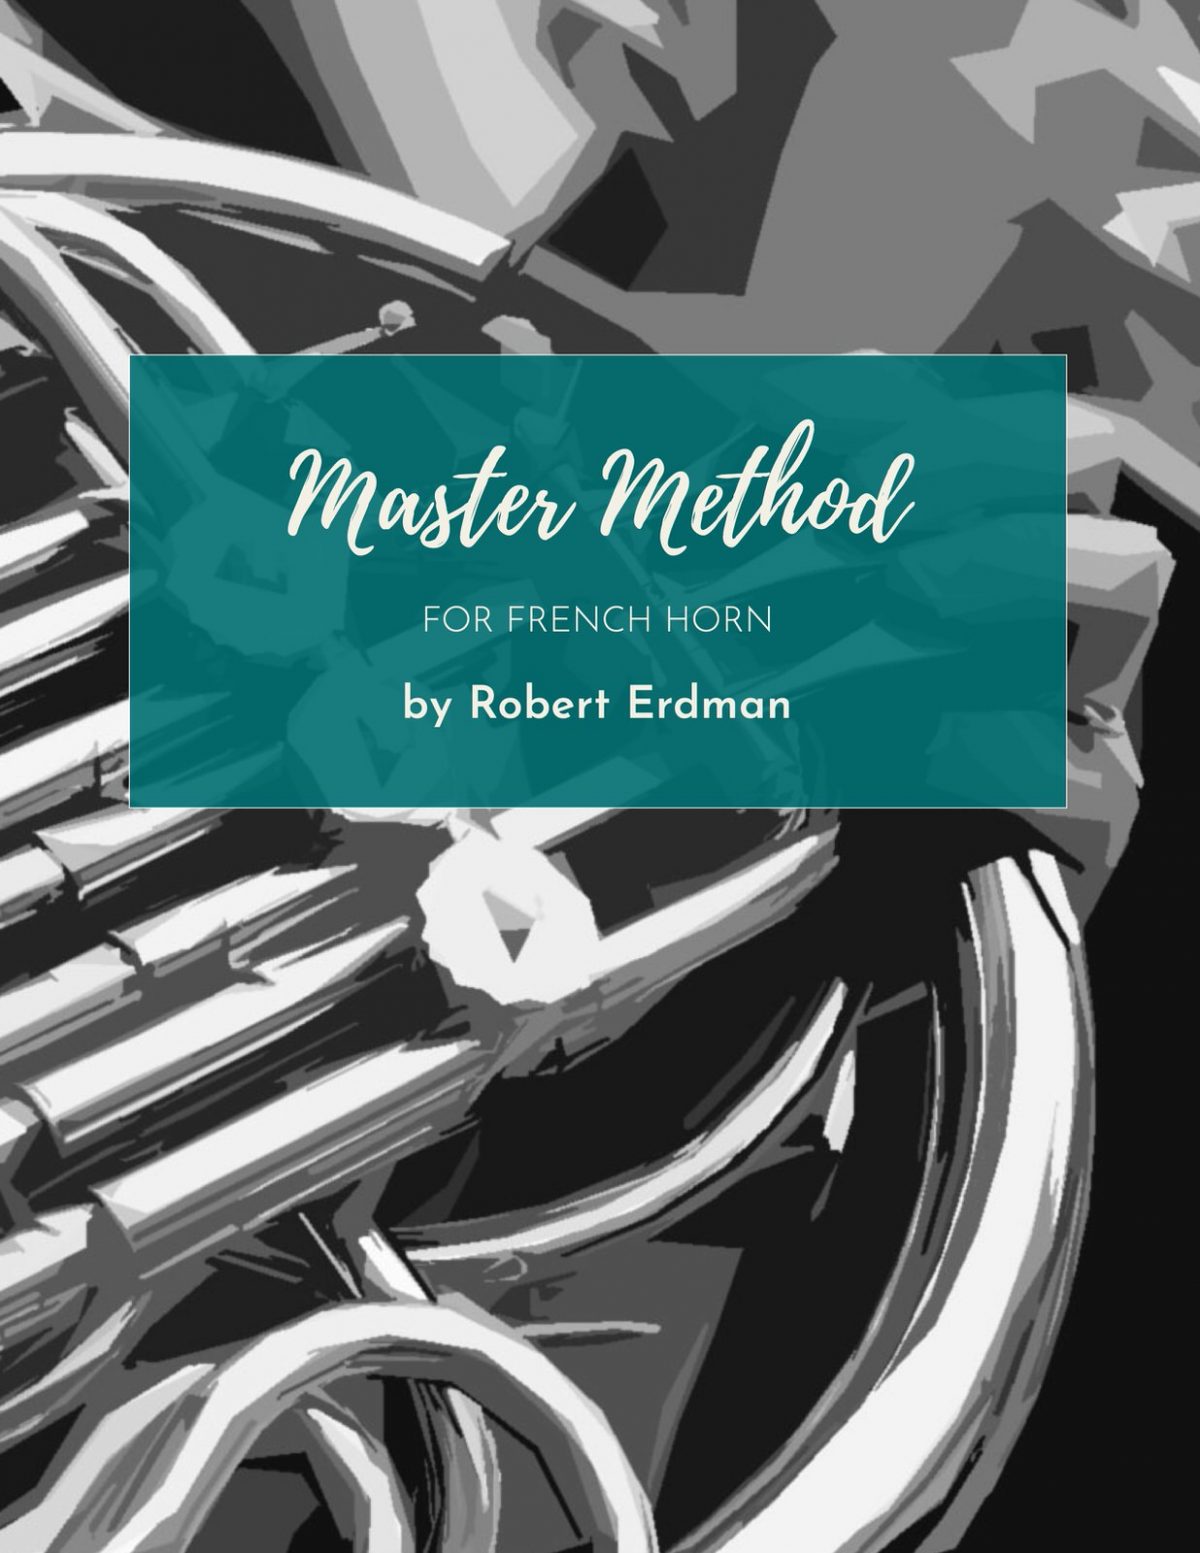 The Master Method for French Horn